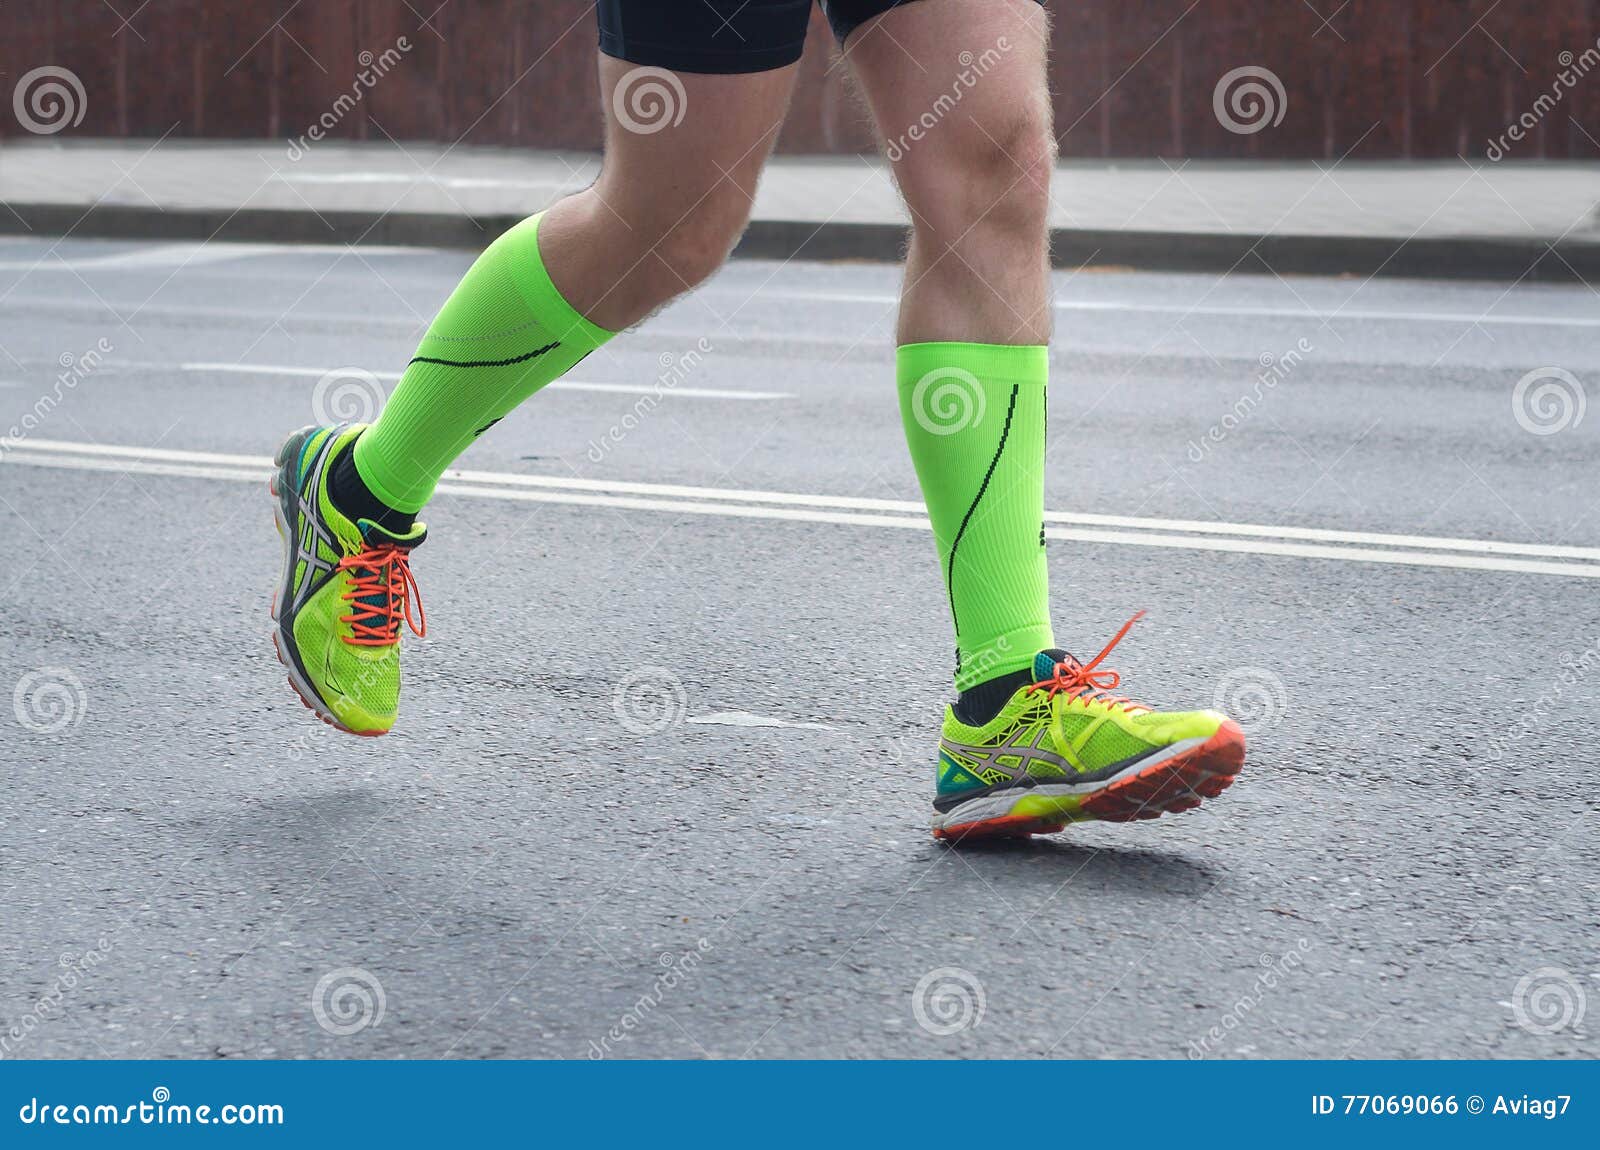 Feet of a Running Man. stock photo. Image of road, person - 77069066